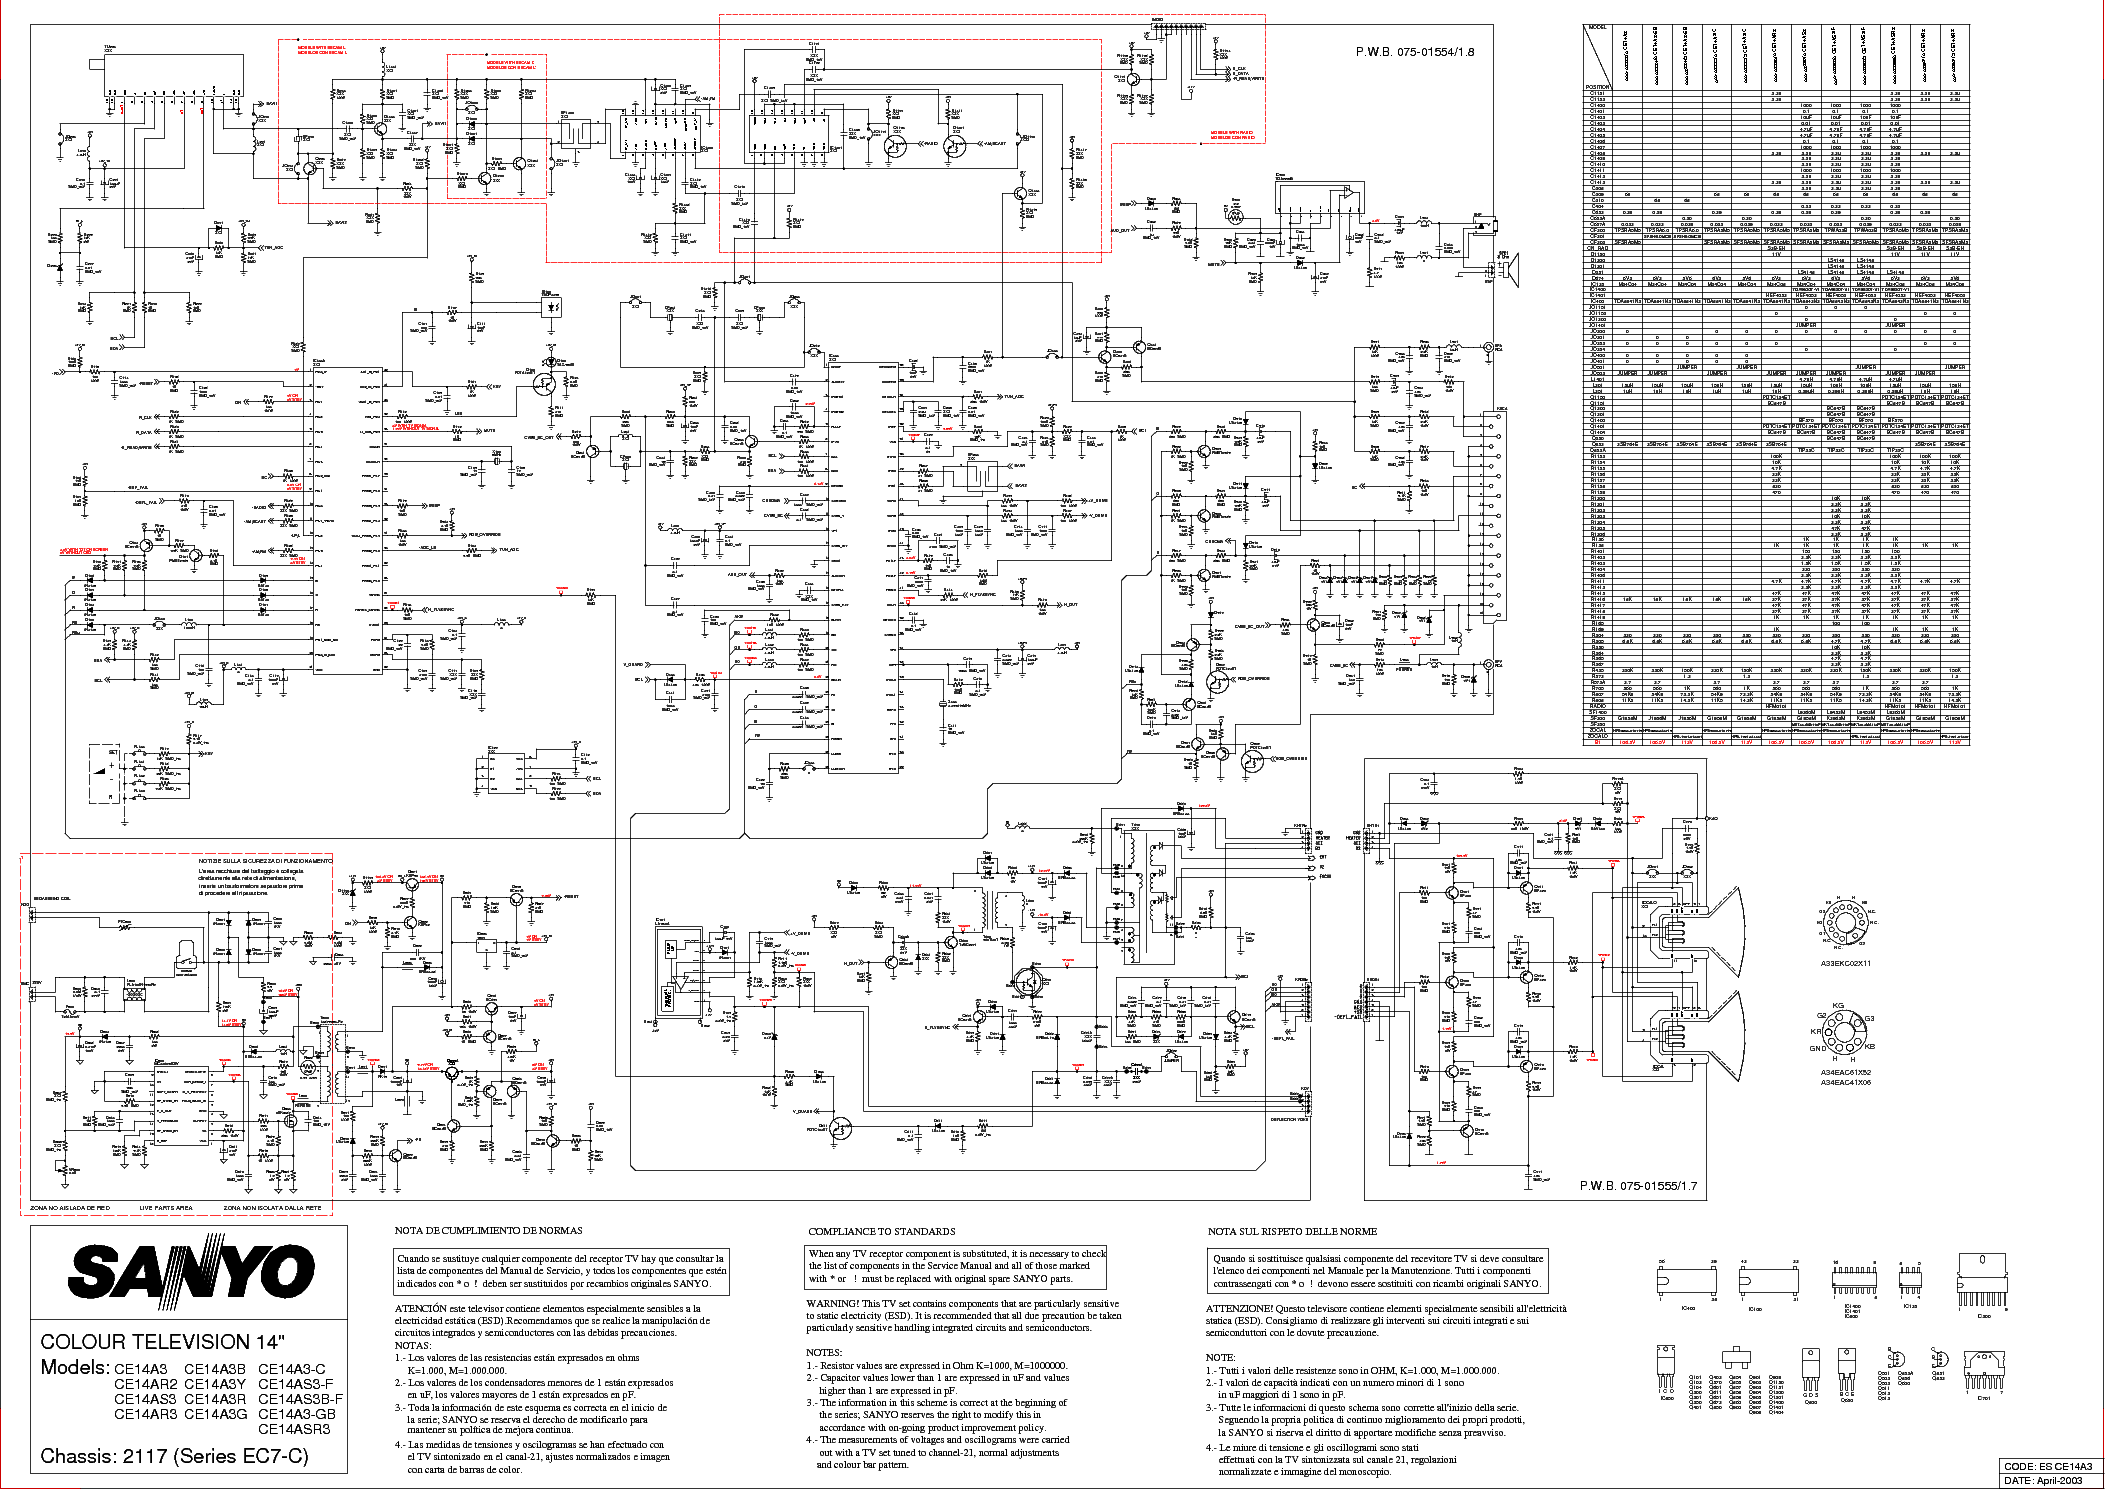 SANYO CE14A3 CHASSIS EC7-C 2117 SCH service manual (1st page)